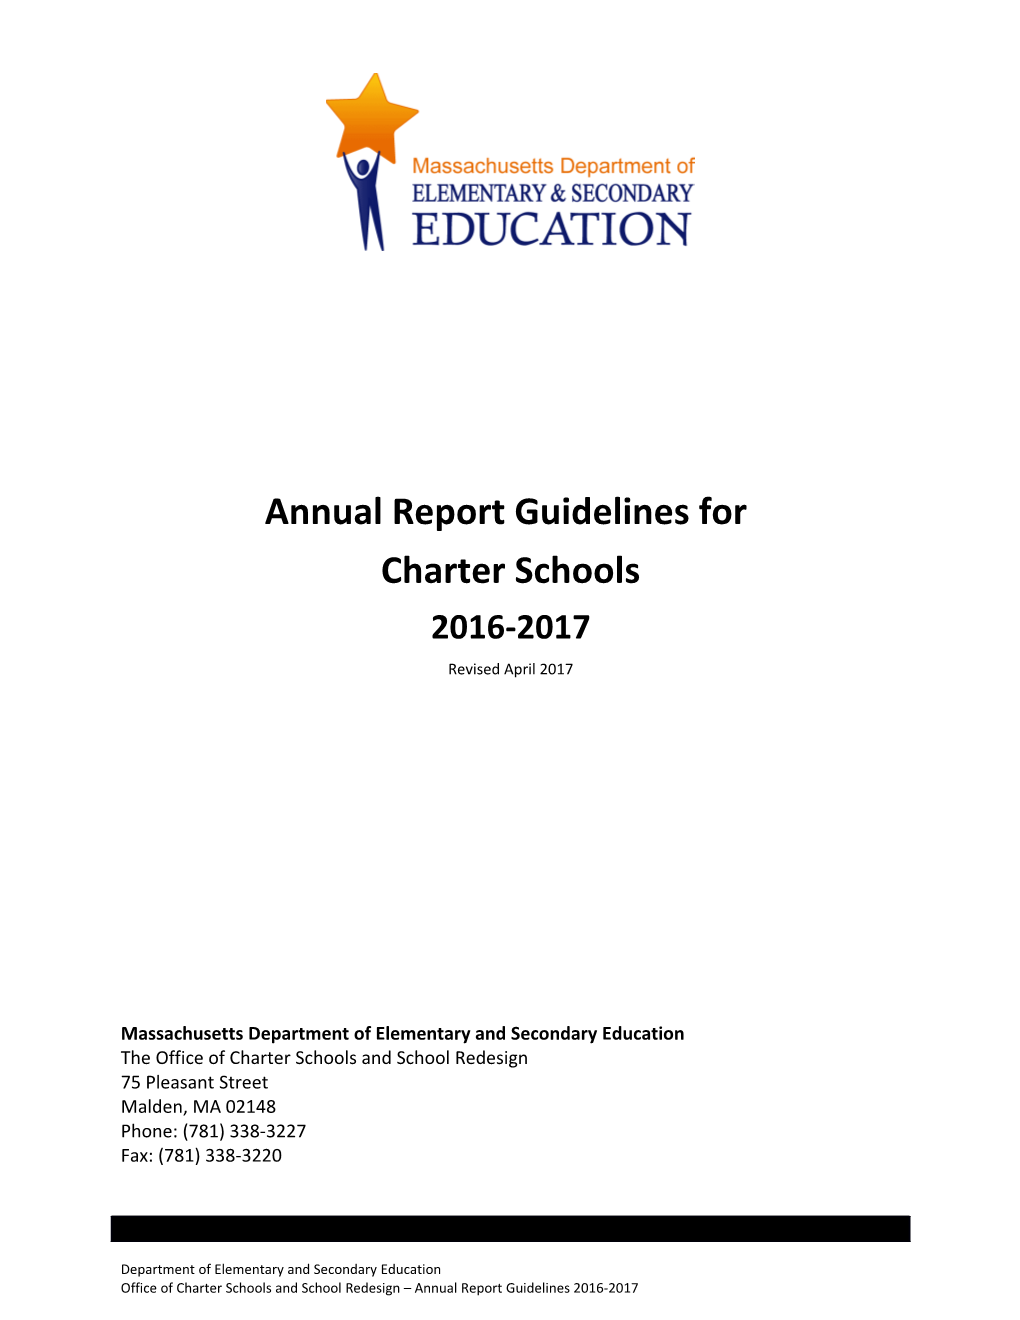 Annual Report Guidelines 2016-17